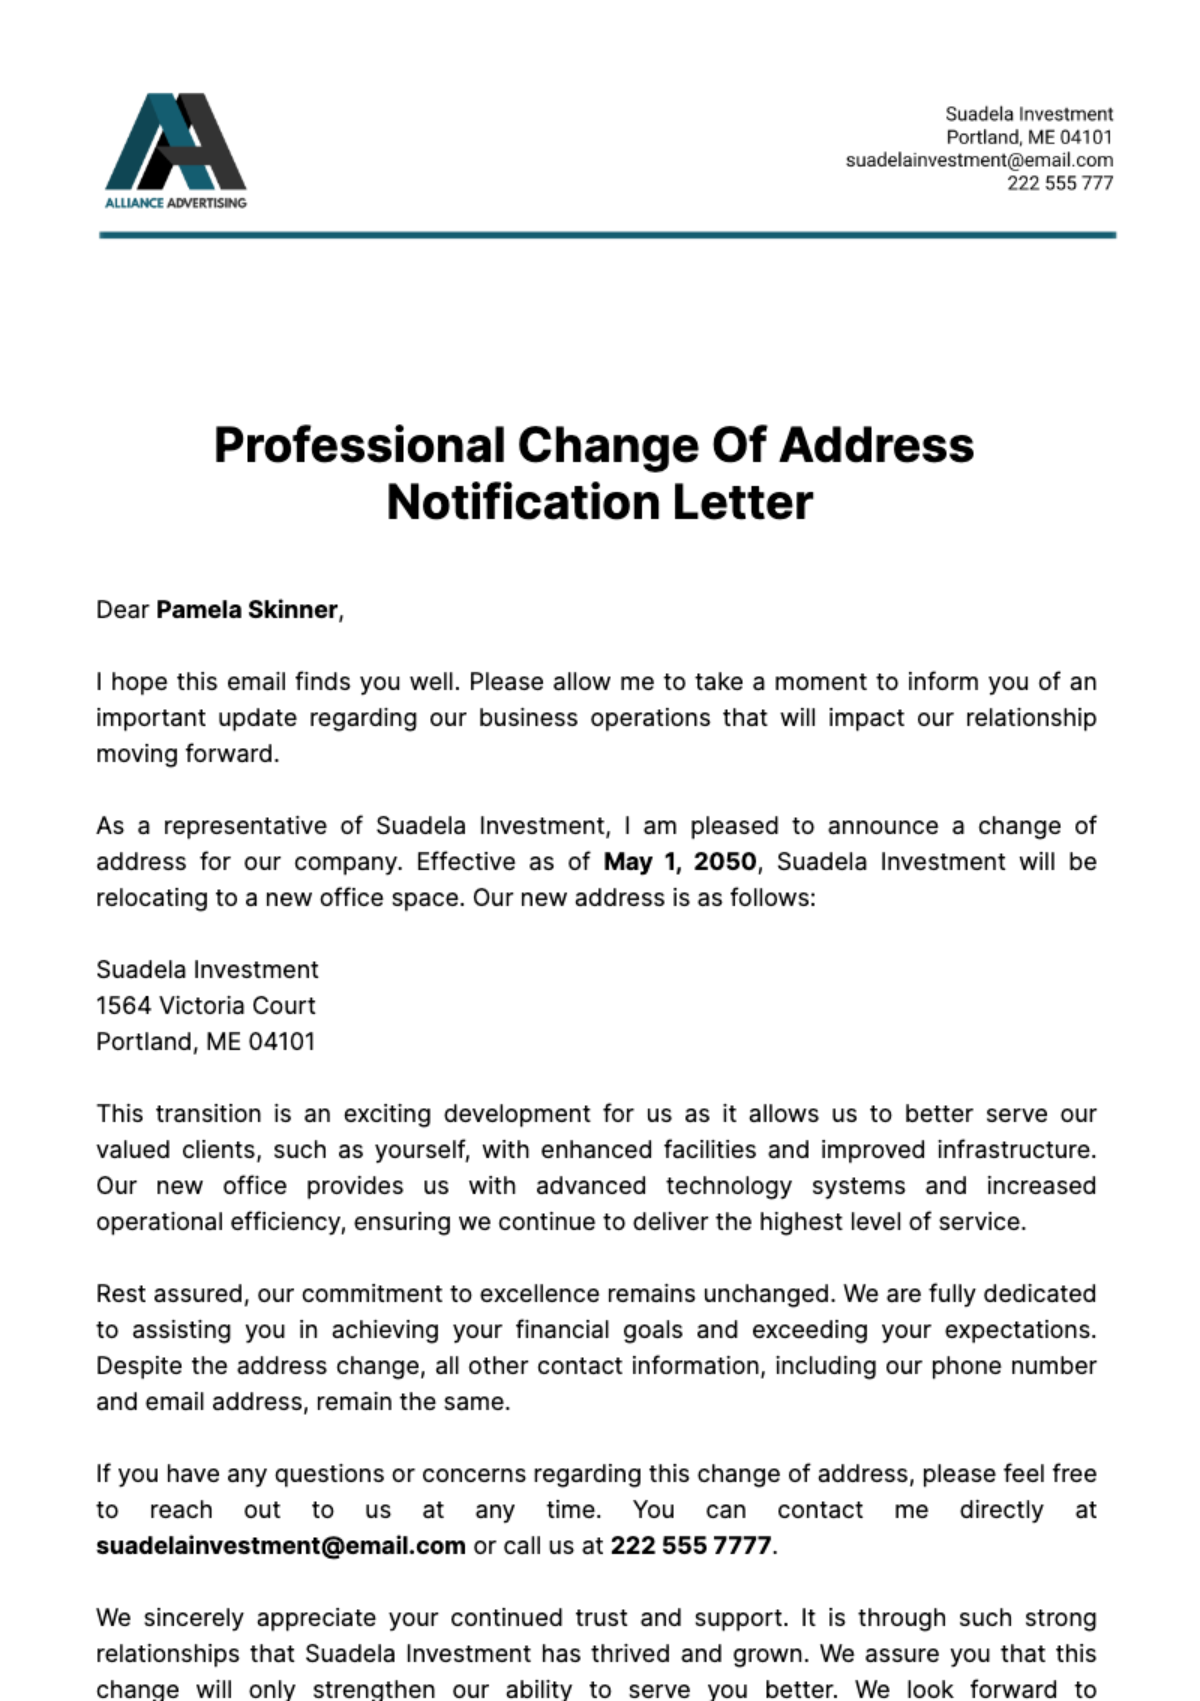 Professional Change of Address Notification Letter Template